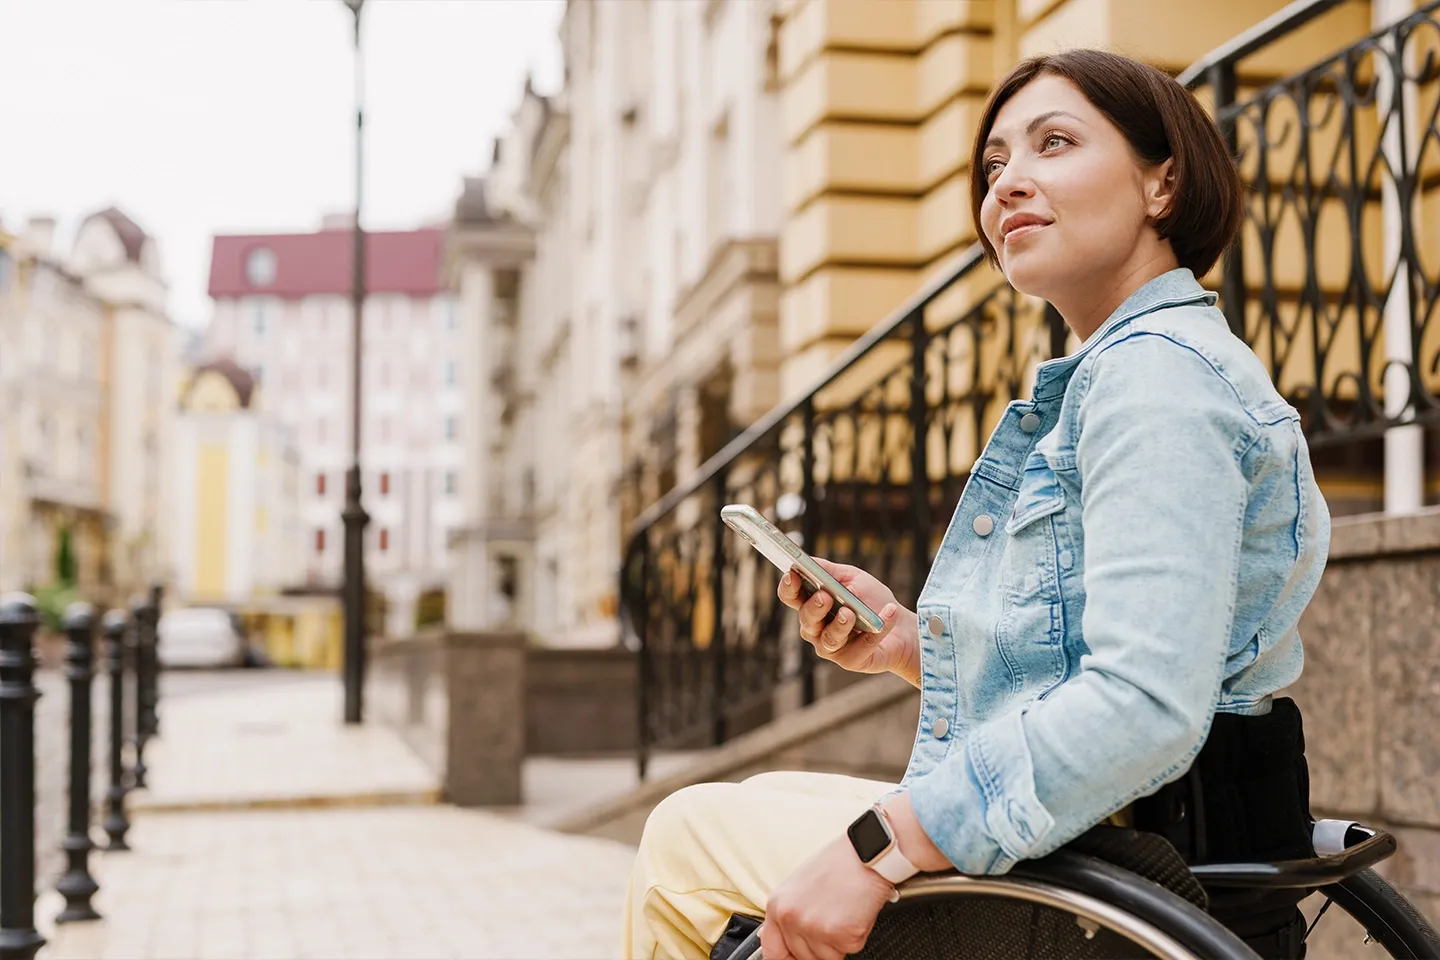 Brunette woman using mobile phone while sitting in wheelchair.